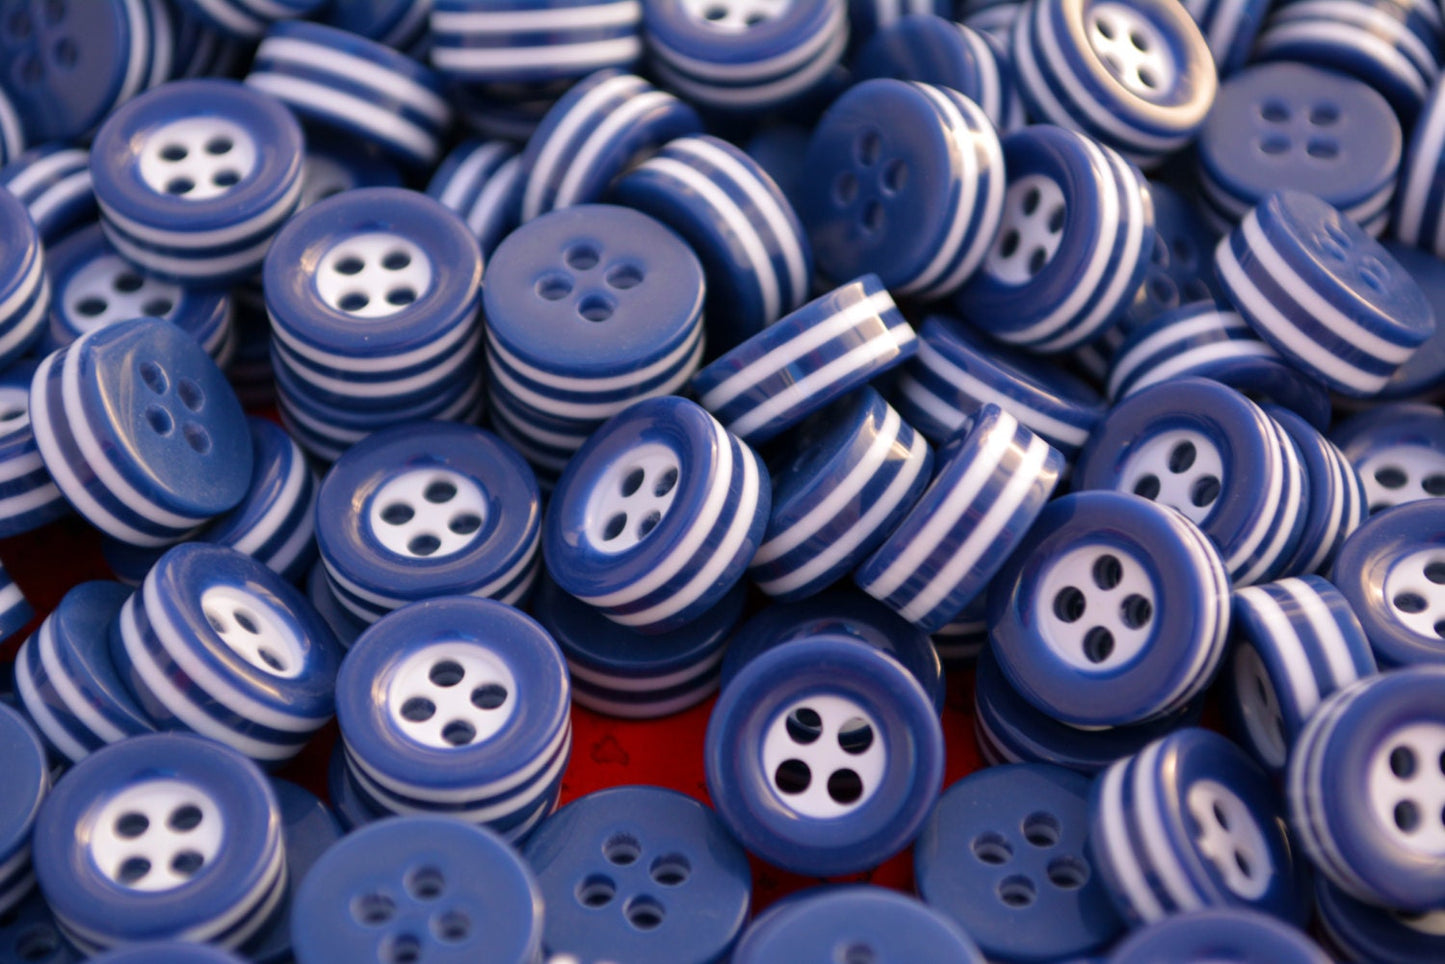 50 white and blue STRIPED BUTTONS - 5mm thick! - choose from sizes 18L 16L - great quality - Made in ITALY